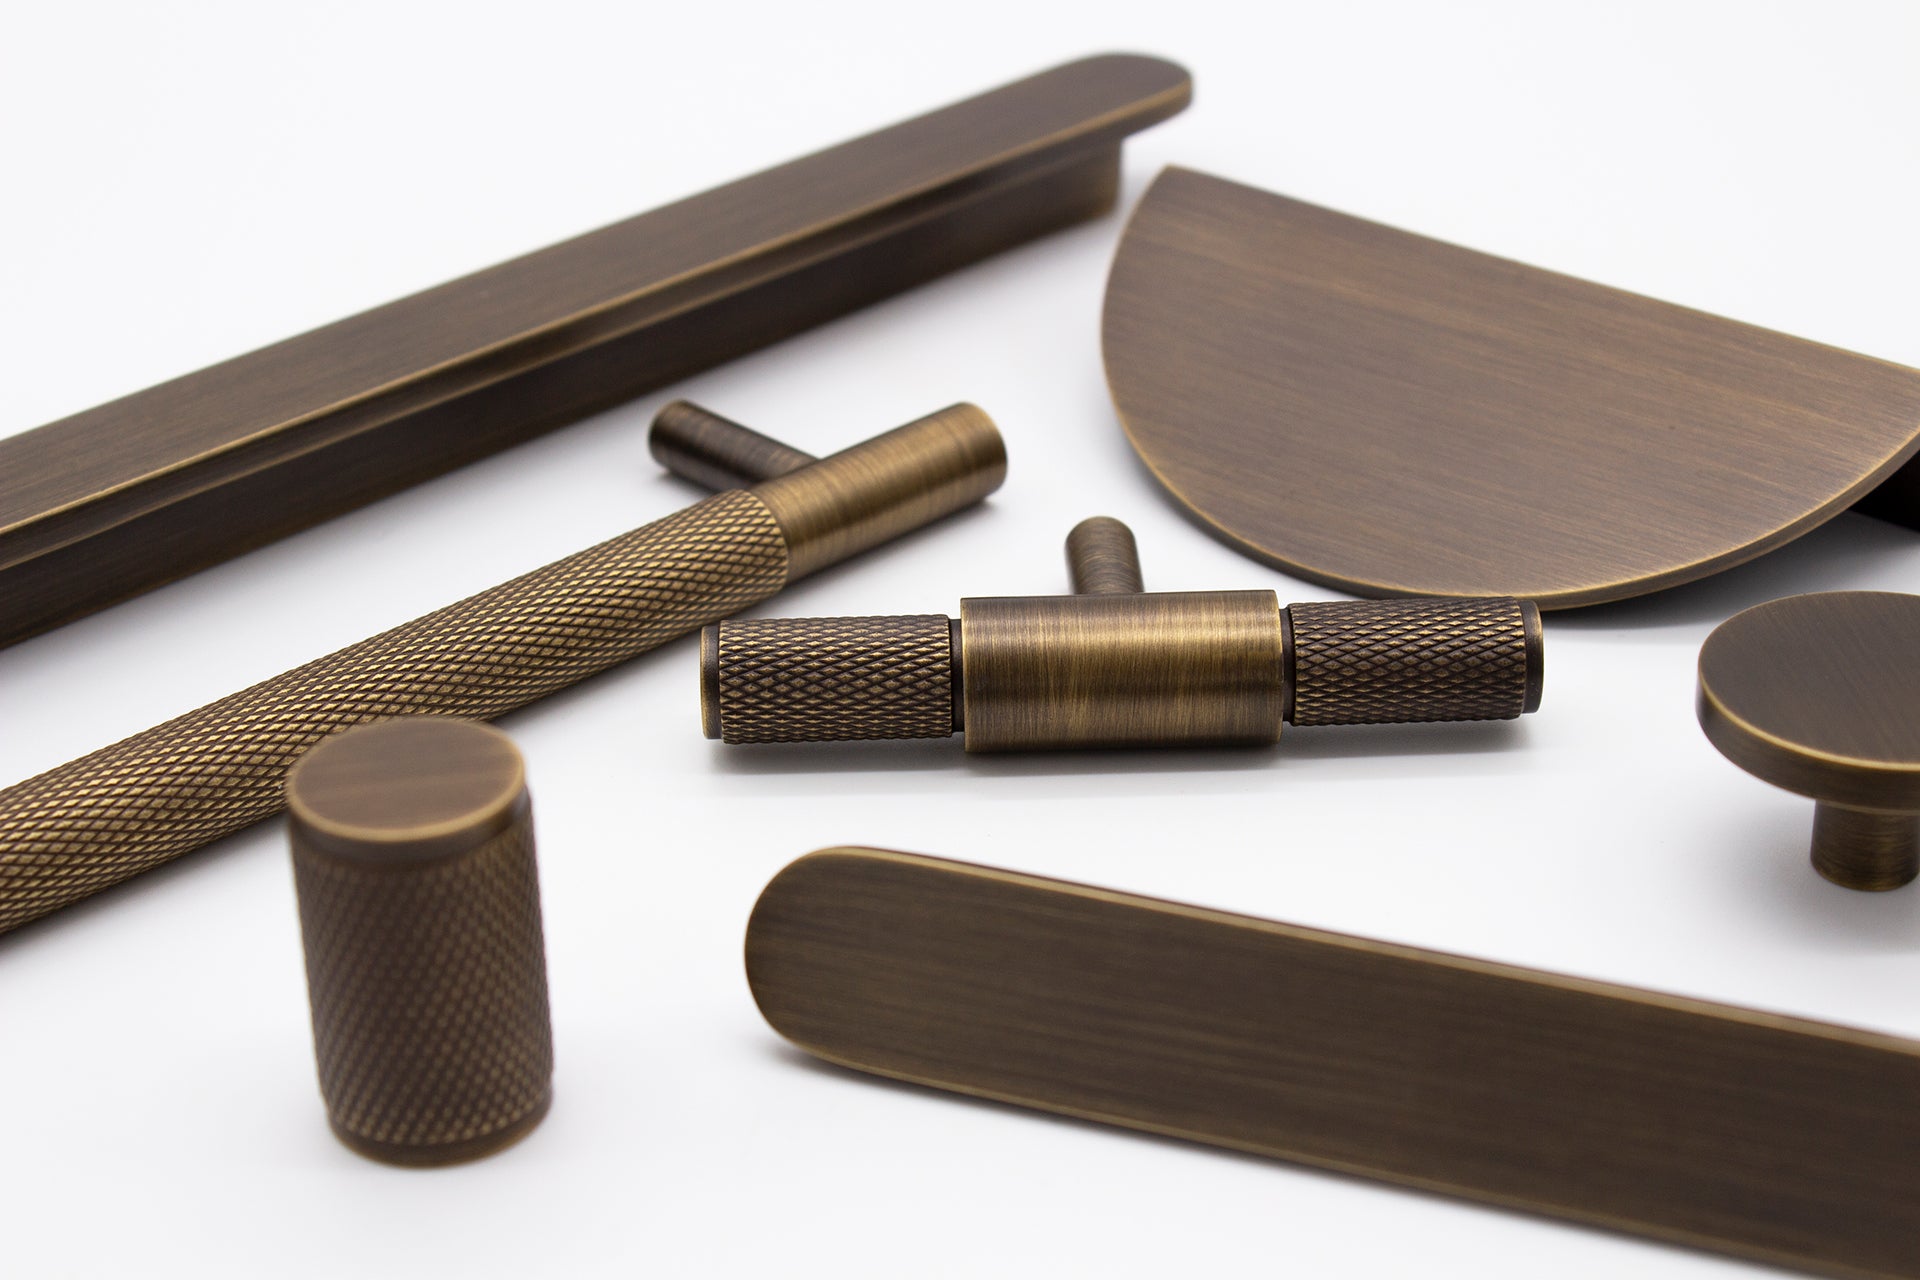 Tradition meets Modernity with Aged Brass Cabinet Handles